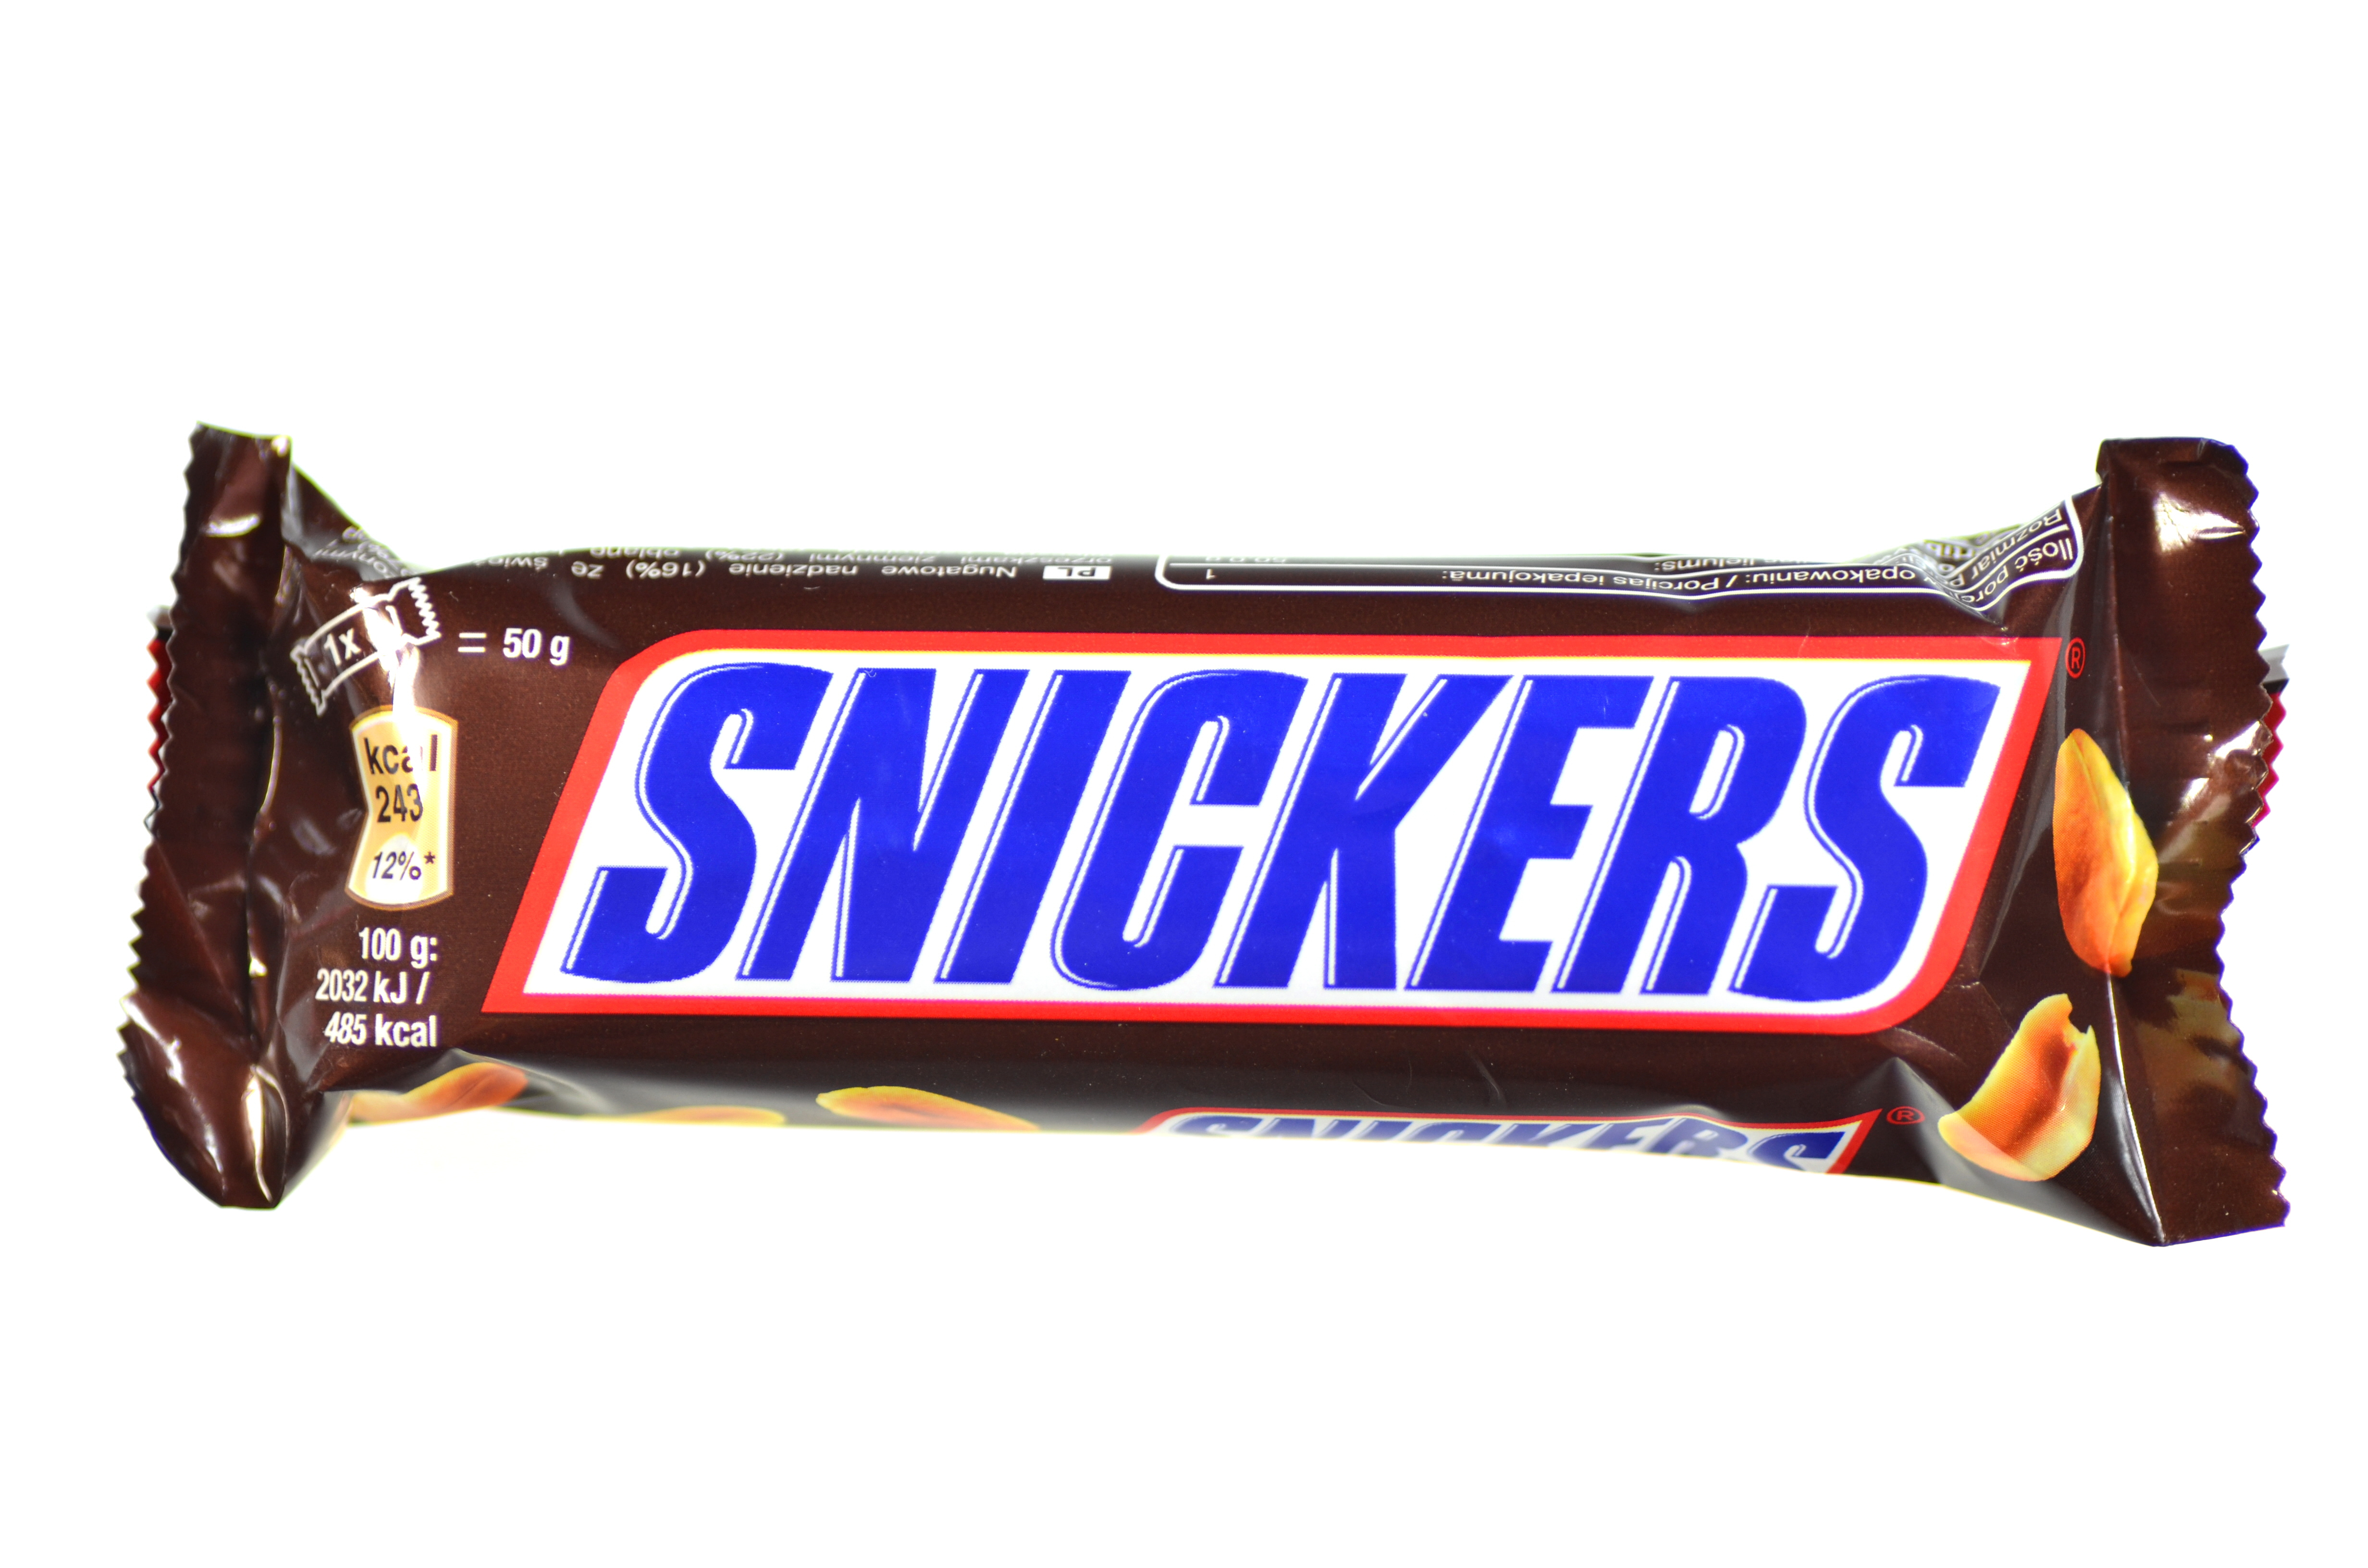 A Snickers chocolate bar.